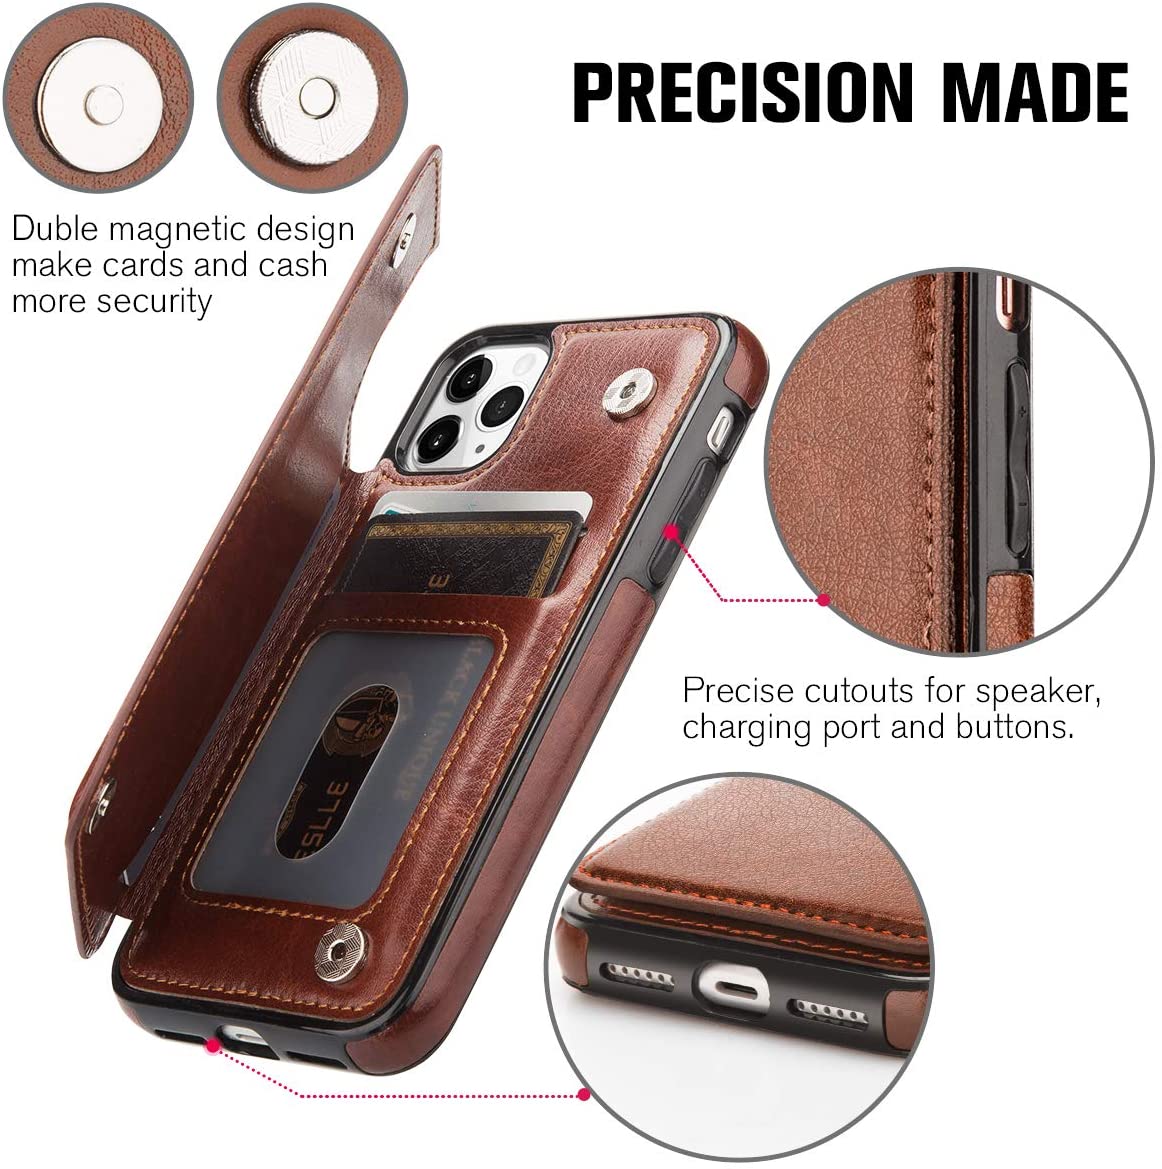 iPhone 11 ProMax Case Back Wallet